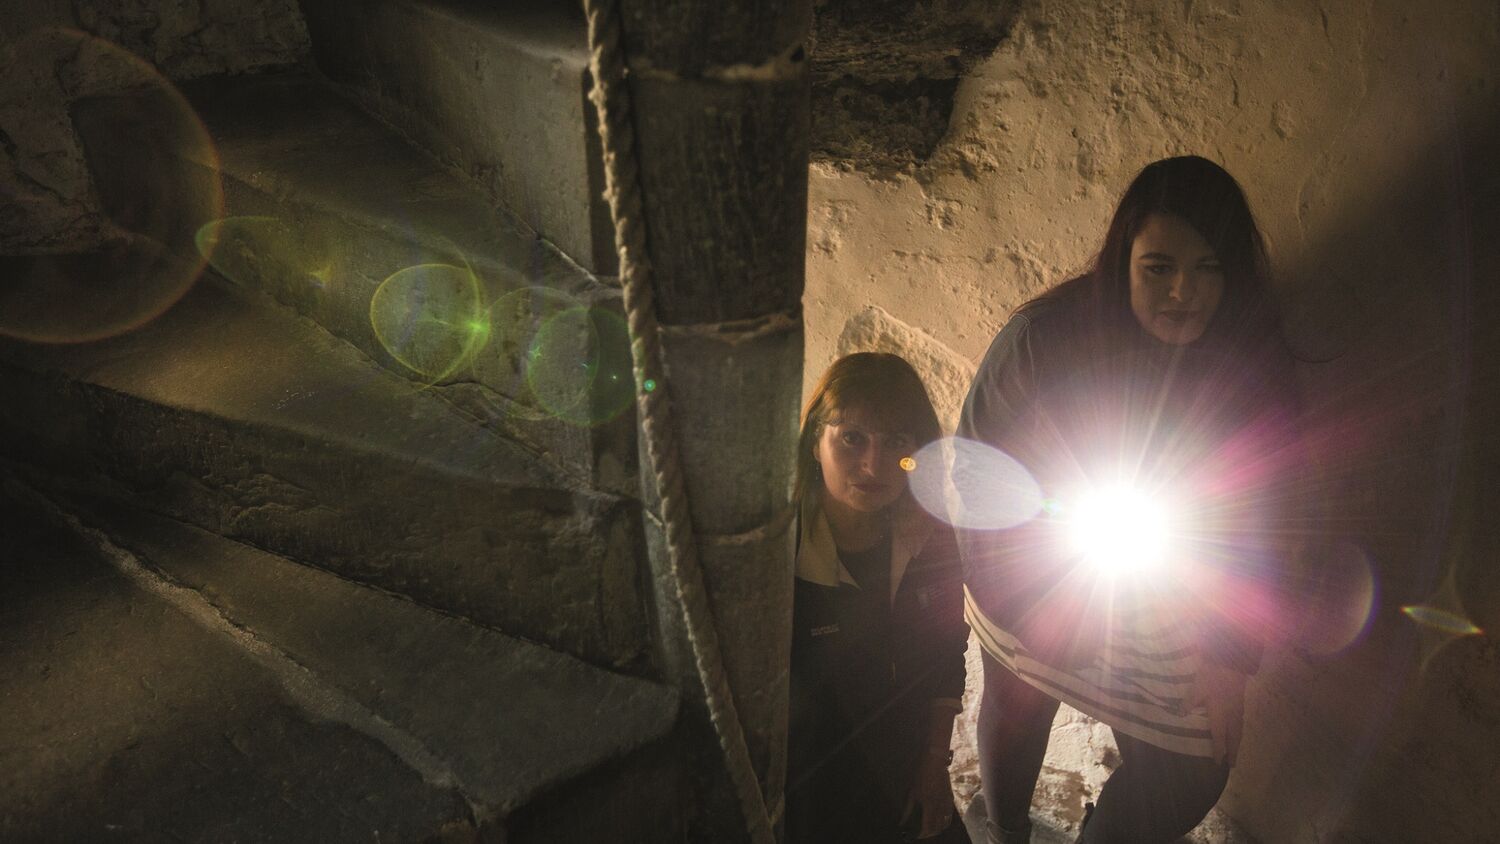 Two women walk up a narrow stone spiral stairwell, looking anxious. The lady in front carries a bright torch to light the stairs above.